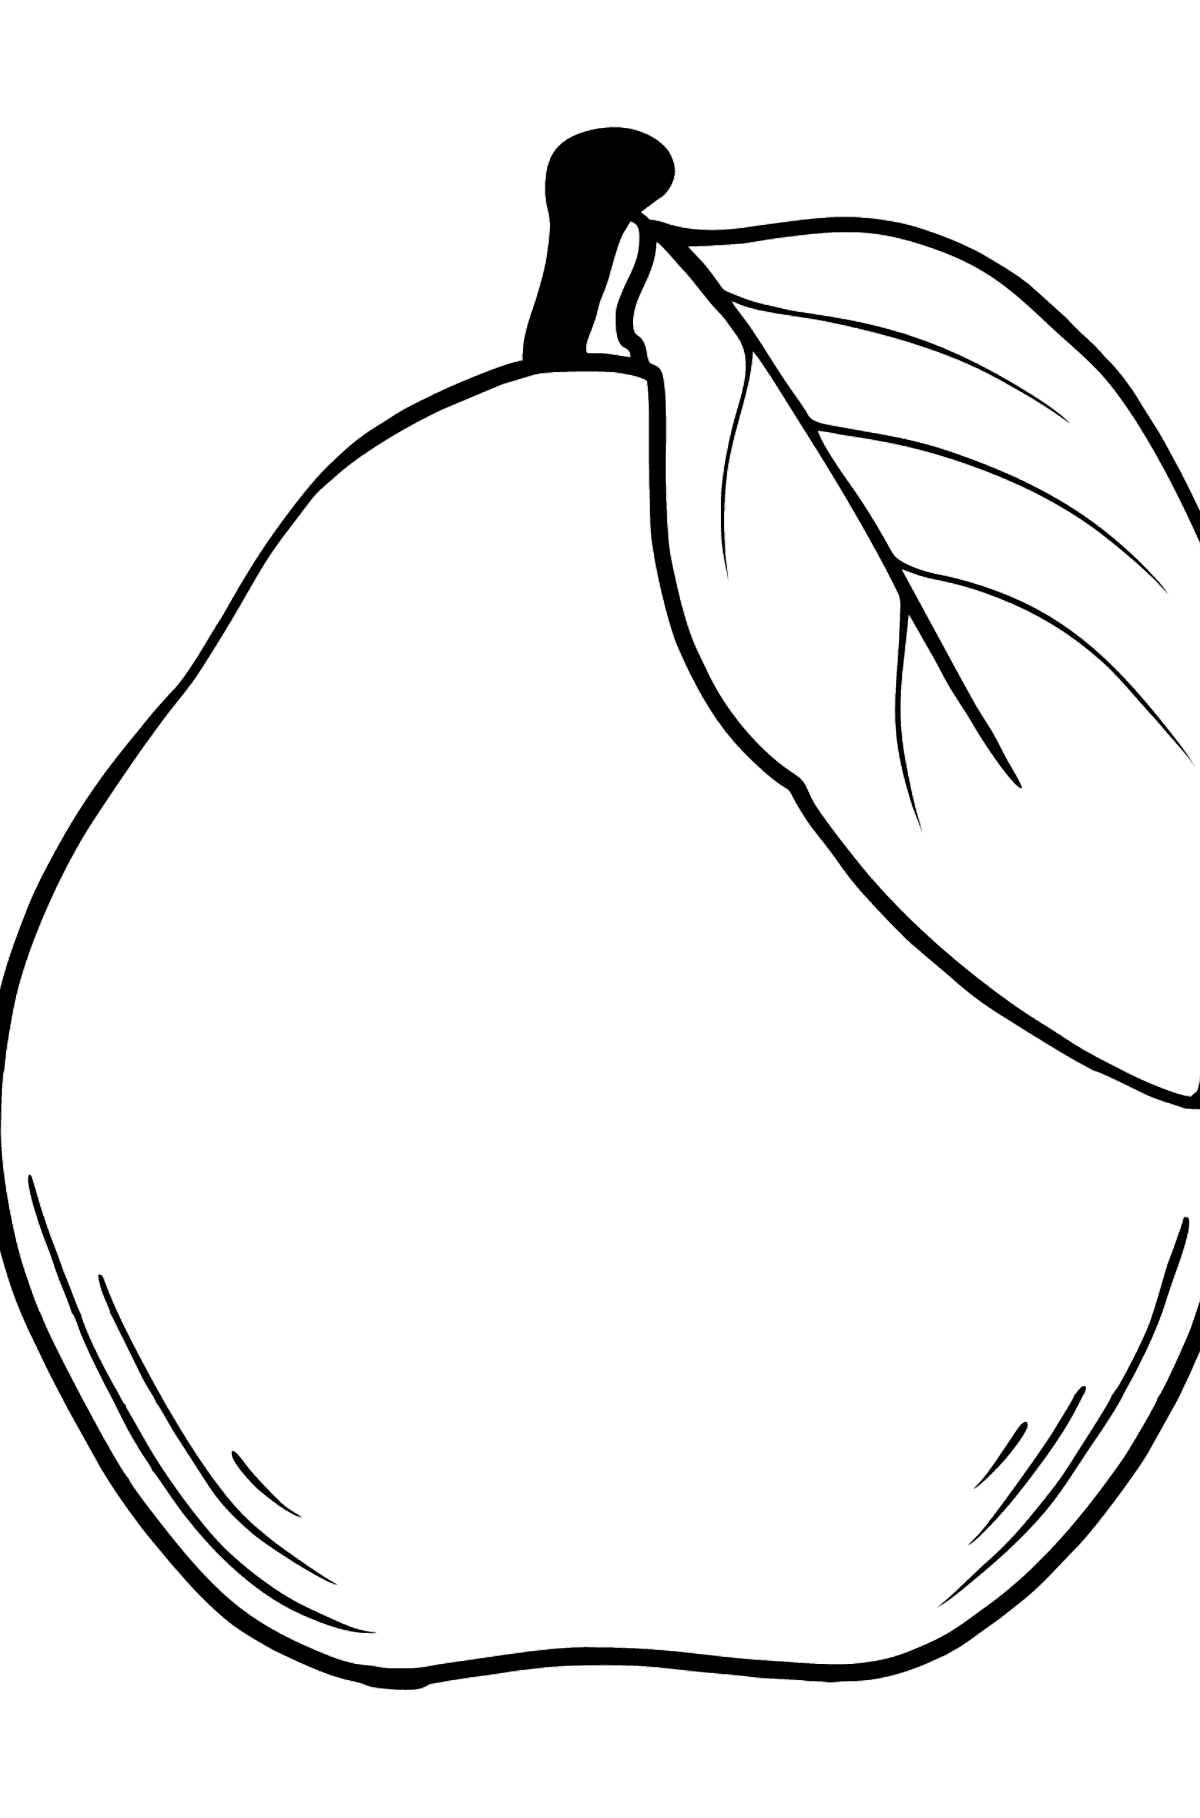 Coloring Pear - Coloring Pages for Kids